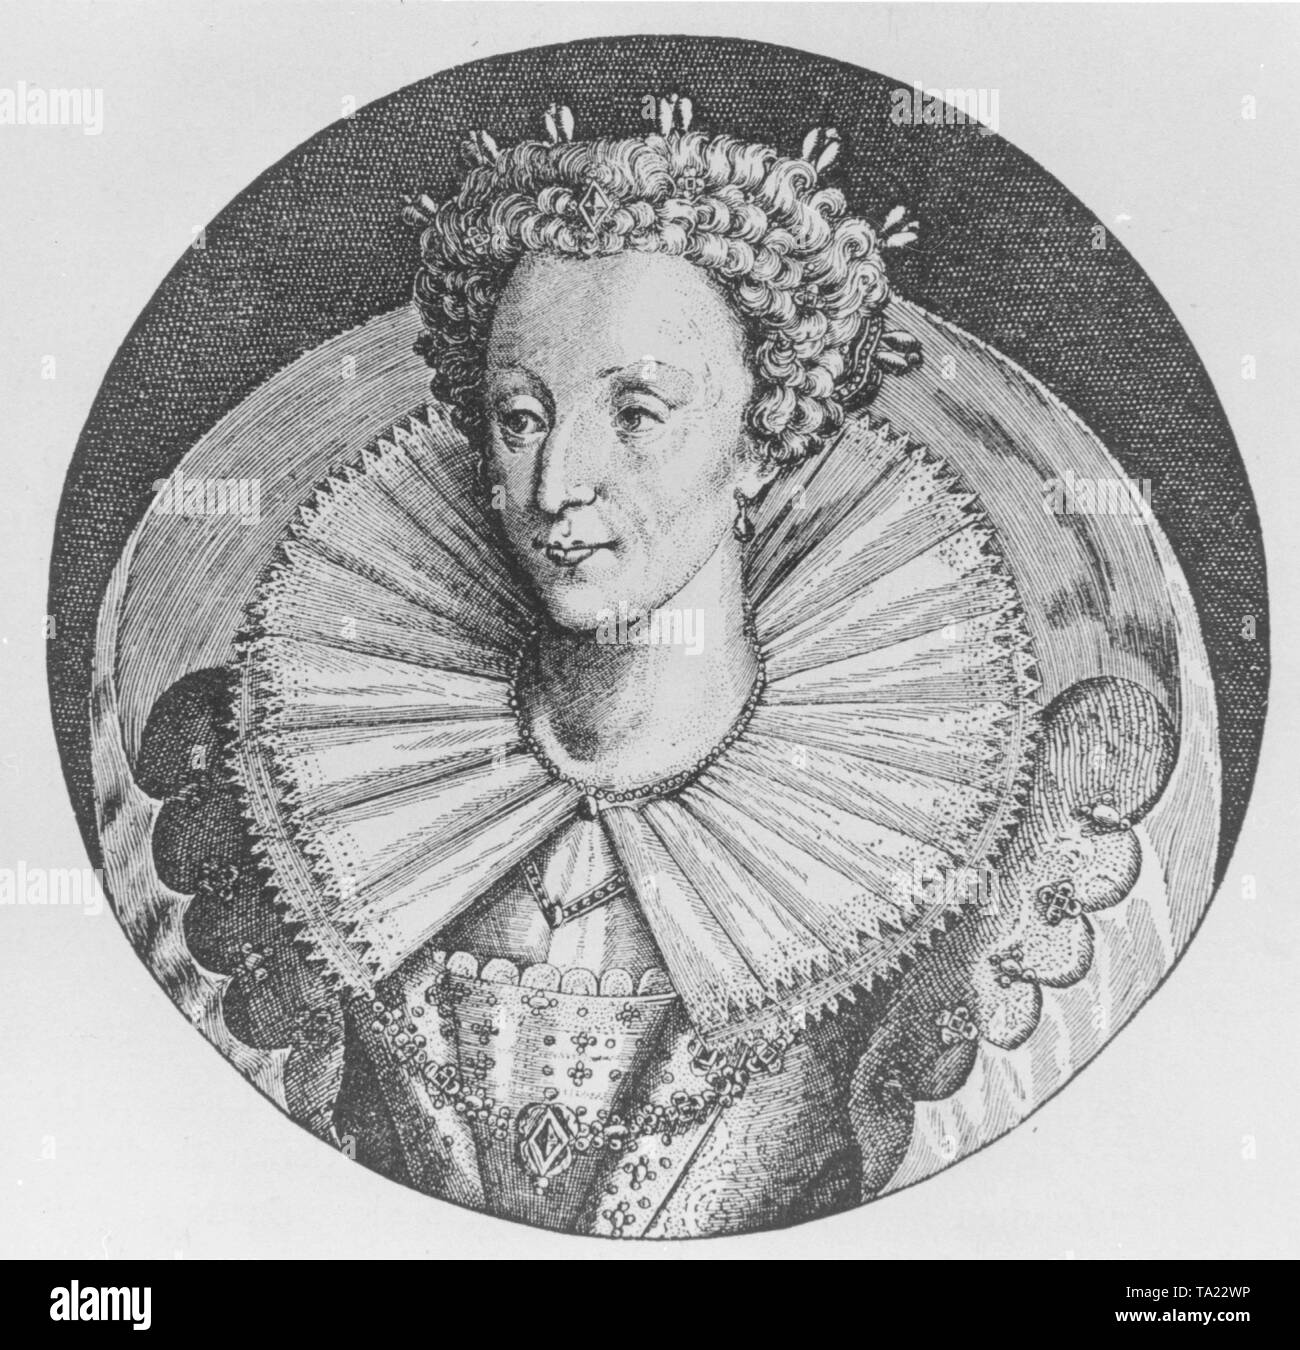 Elizabeth I, Queen of England (1558-1603), last of the House of Tudor. She was born in Greenwich (now in London) on 7.9.1533 and died in Richmond upon Thames (now in London)